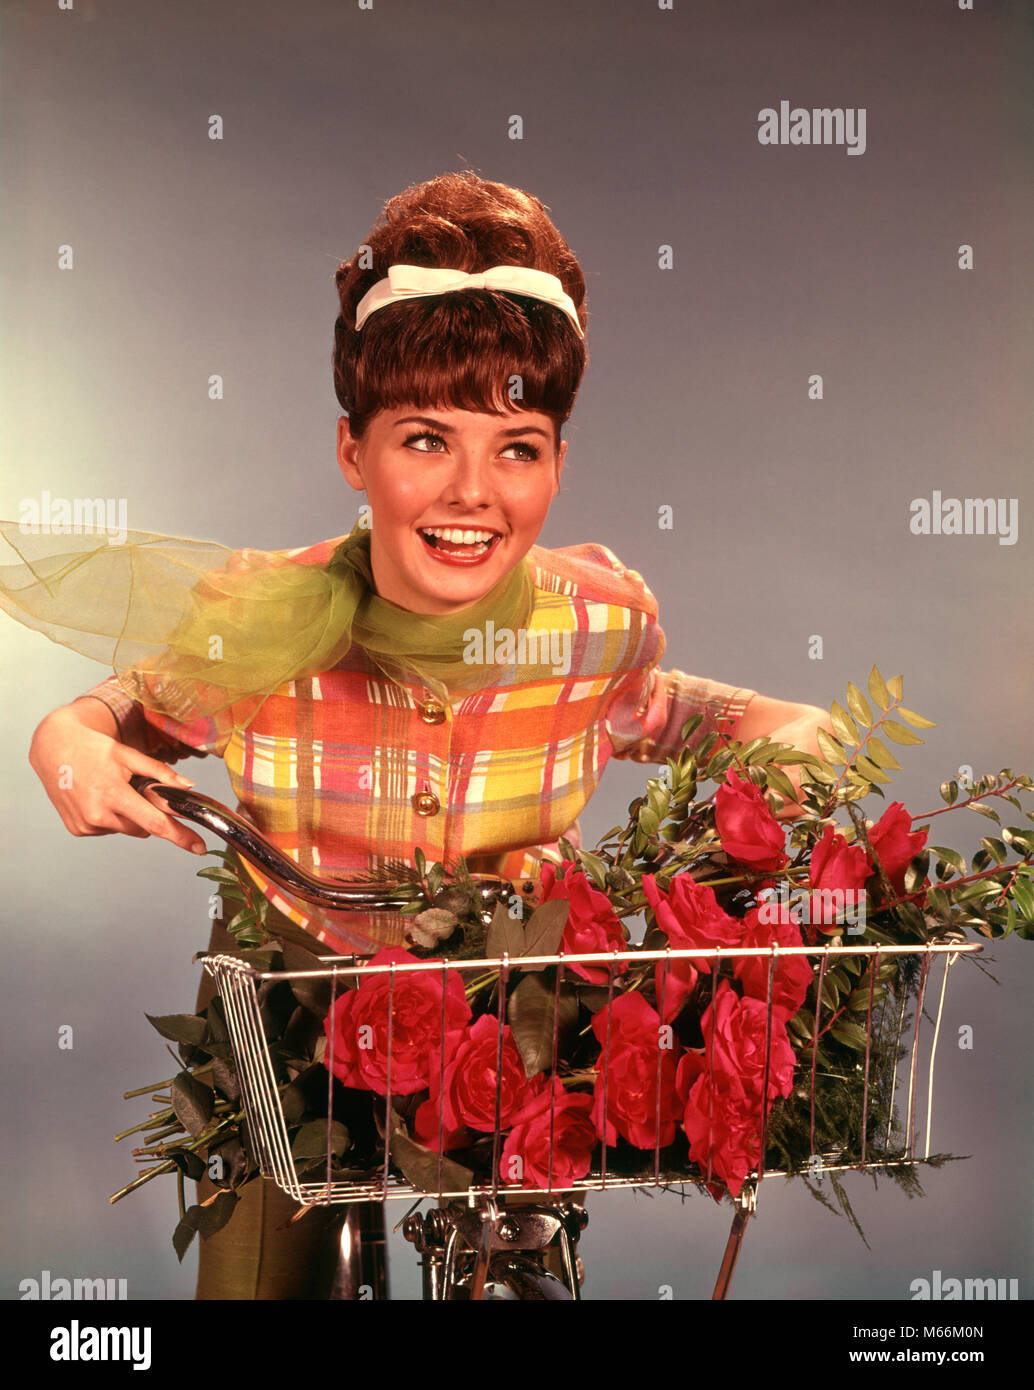 1960s SMILING TEEN GIRL WITH TEASED BRUNETTE BOUFFANT HAIRDO RIDING BICYCLE WITH RED ROSES BOUQUET IN BASKET - kf4337 HAR001 HARS PLEASED JOY LIFESTYLE FEMALES STUDIO SHOT BIKING ROSES HEALTHINESS ONE PERSON ONLY COPY SPACE HALF-LENGTH LADIES TEENAGE GIRL CONFIDENCE HEADBAND TRANSPORTATION NOSTALGIA 16-17 YEARS BRUNETTE HAPPINESS WELLNESS LEISURE STYLES HAIRSTYLE RECREATION SMILES JOYFUL FASHIONS TEENAGED HAIRDO JUVENILES TEASED YOUNG ADULT WOMAN BANGS BIG HAIR BIKER BOUFFANT CAUCASIAN ETHNICITY HAIR BOW OLD FASHIONED PERSONS Stock Photo